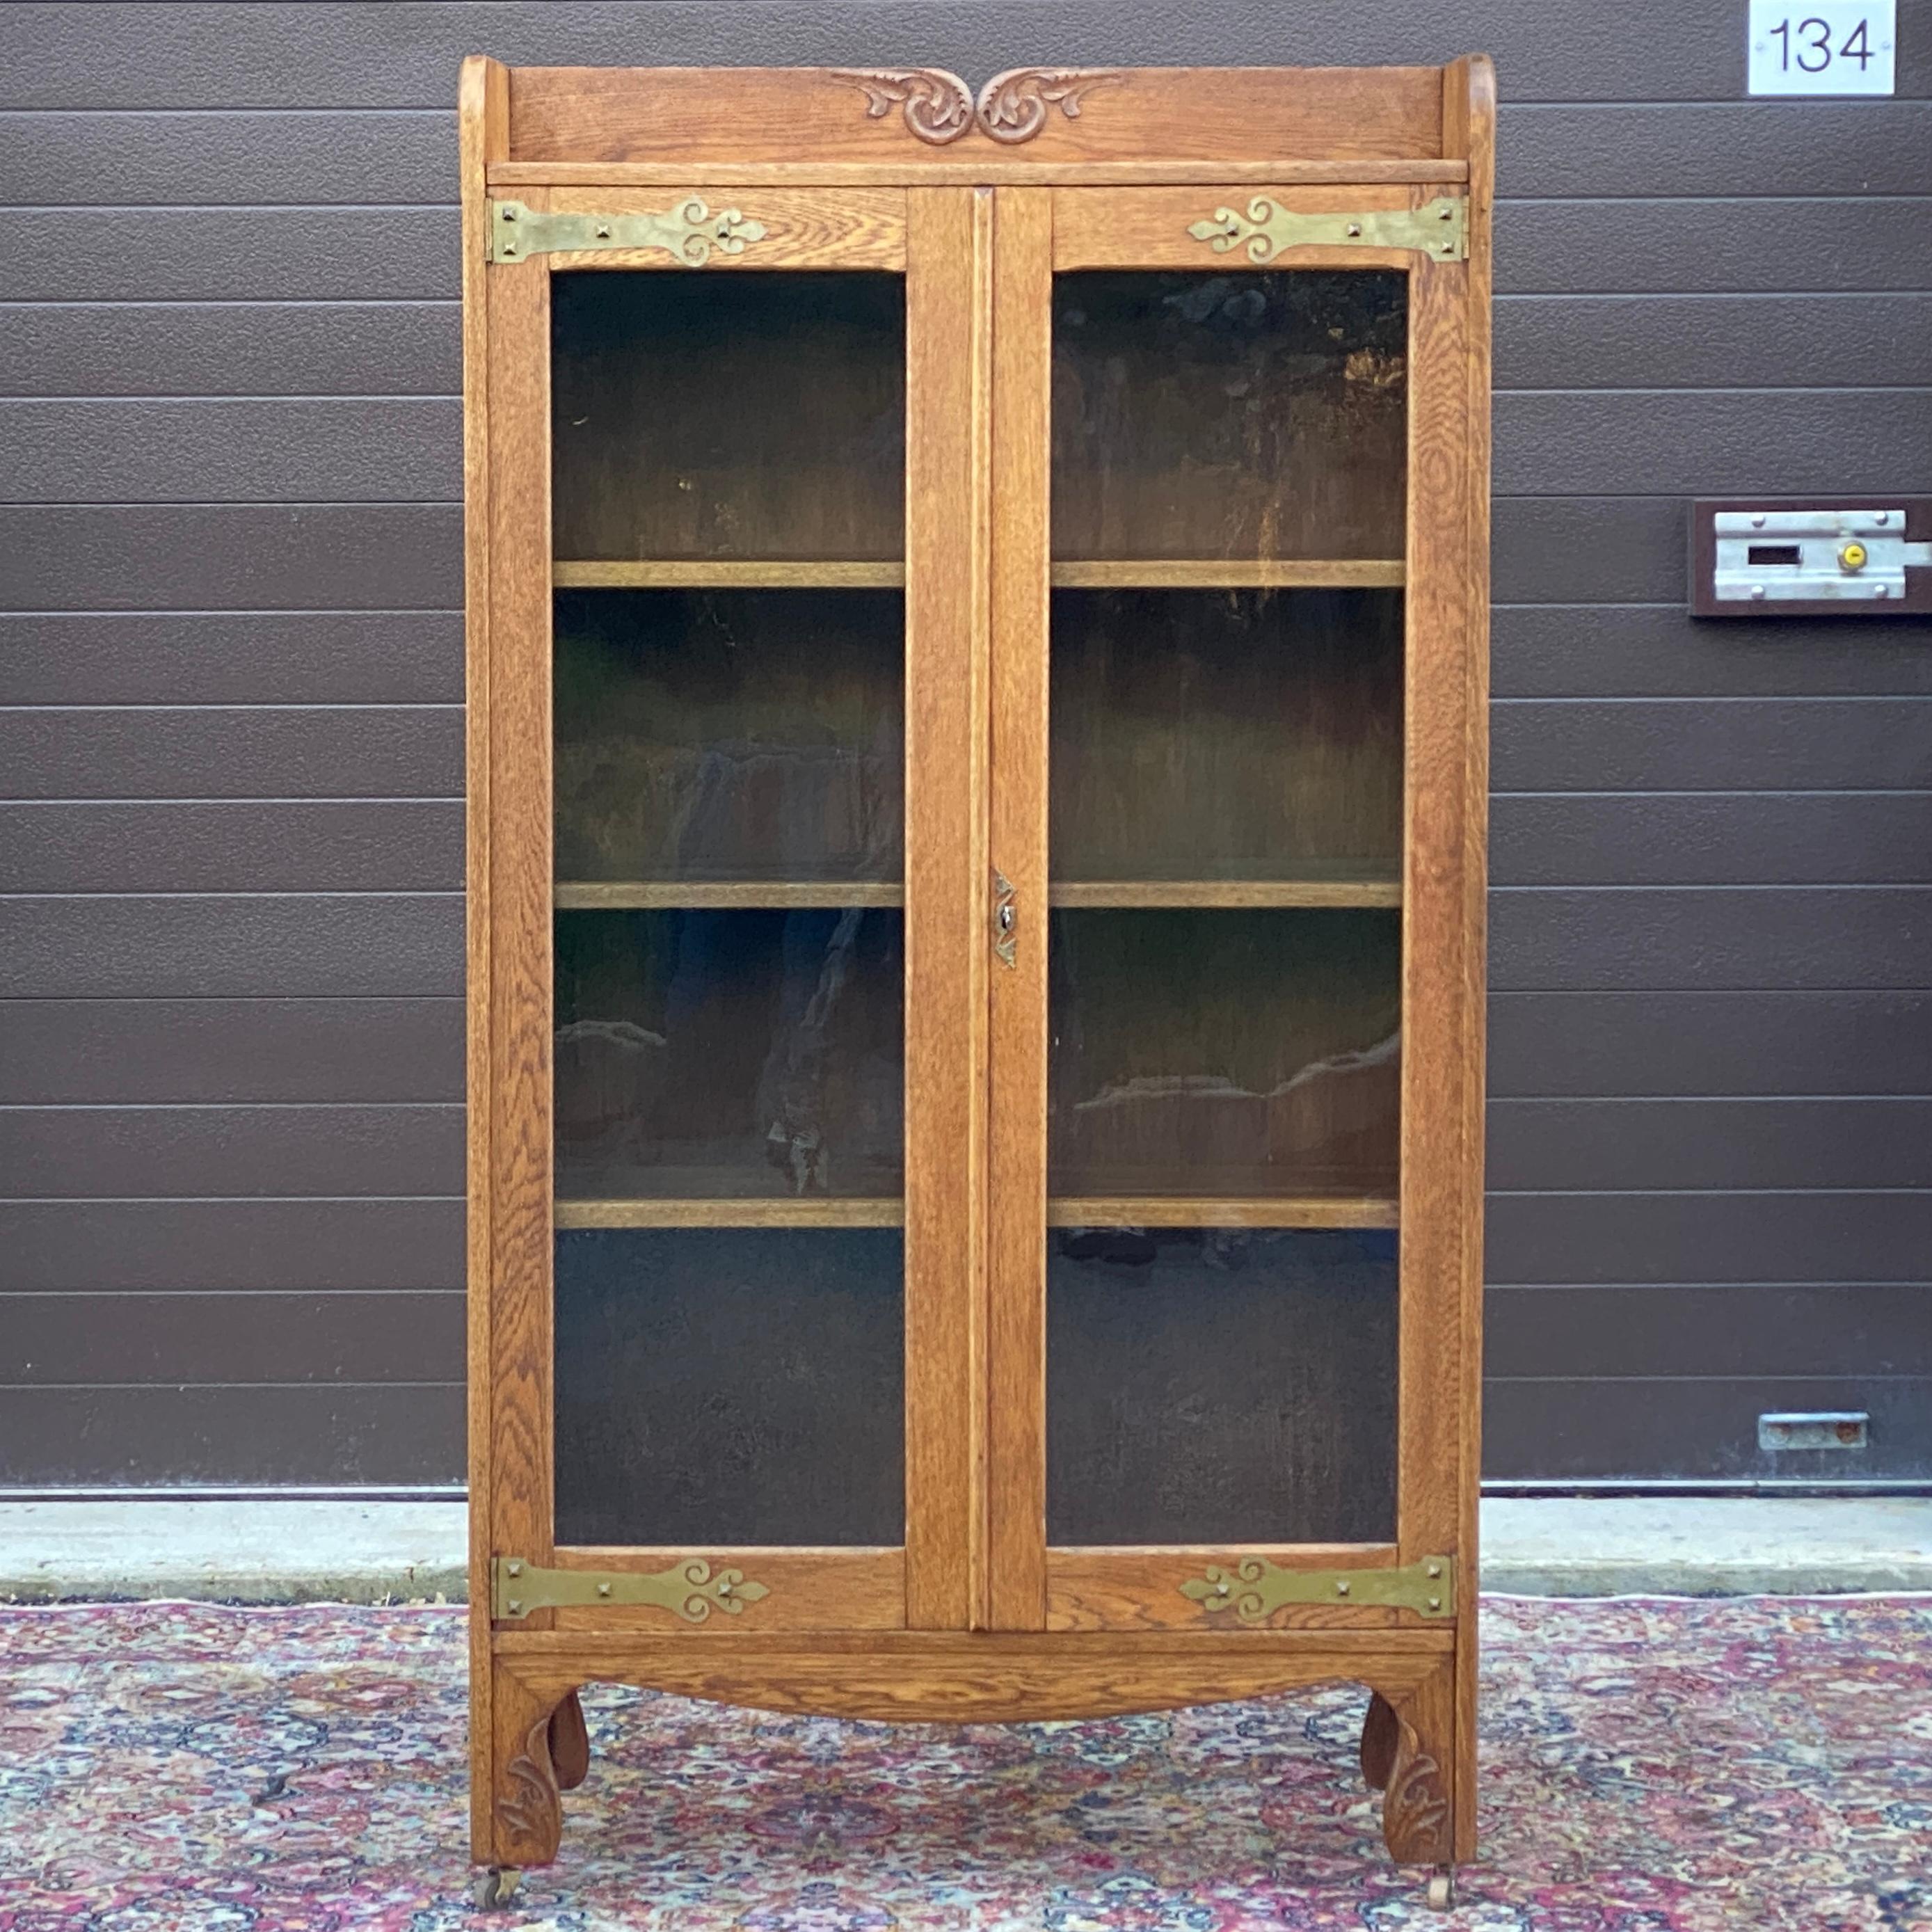 Antique oak locking glass door bookcase with decorative brass hinges and hand carved details. 
Interior adjustable shelves 31.5”w x 9.75”d